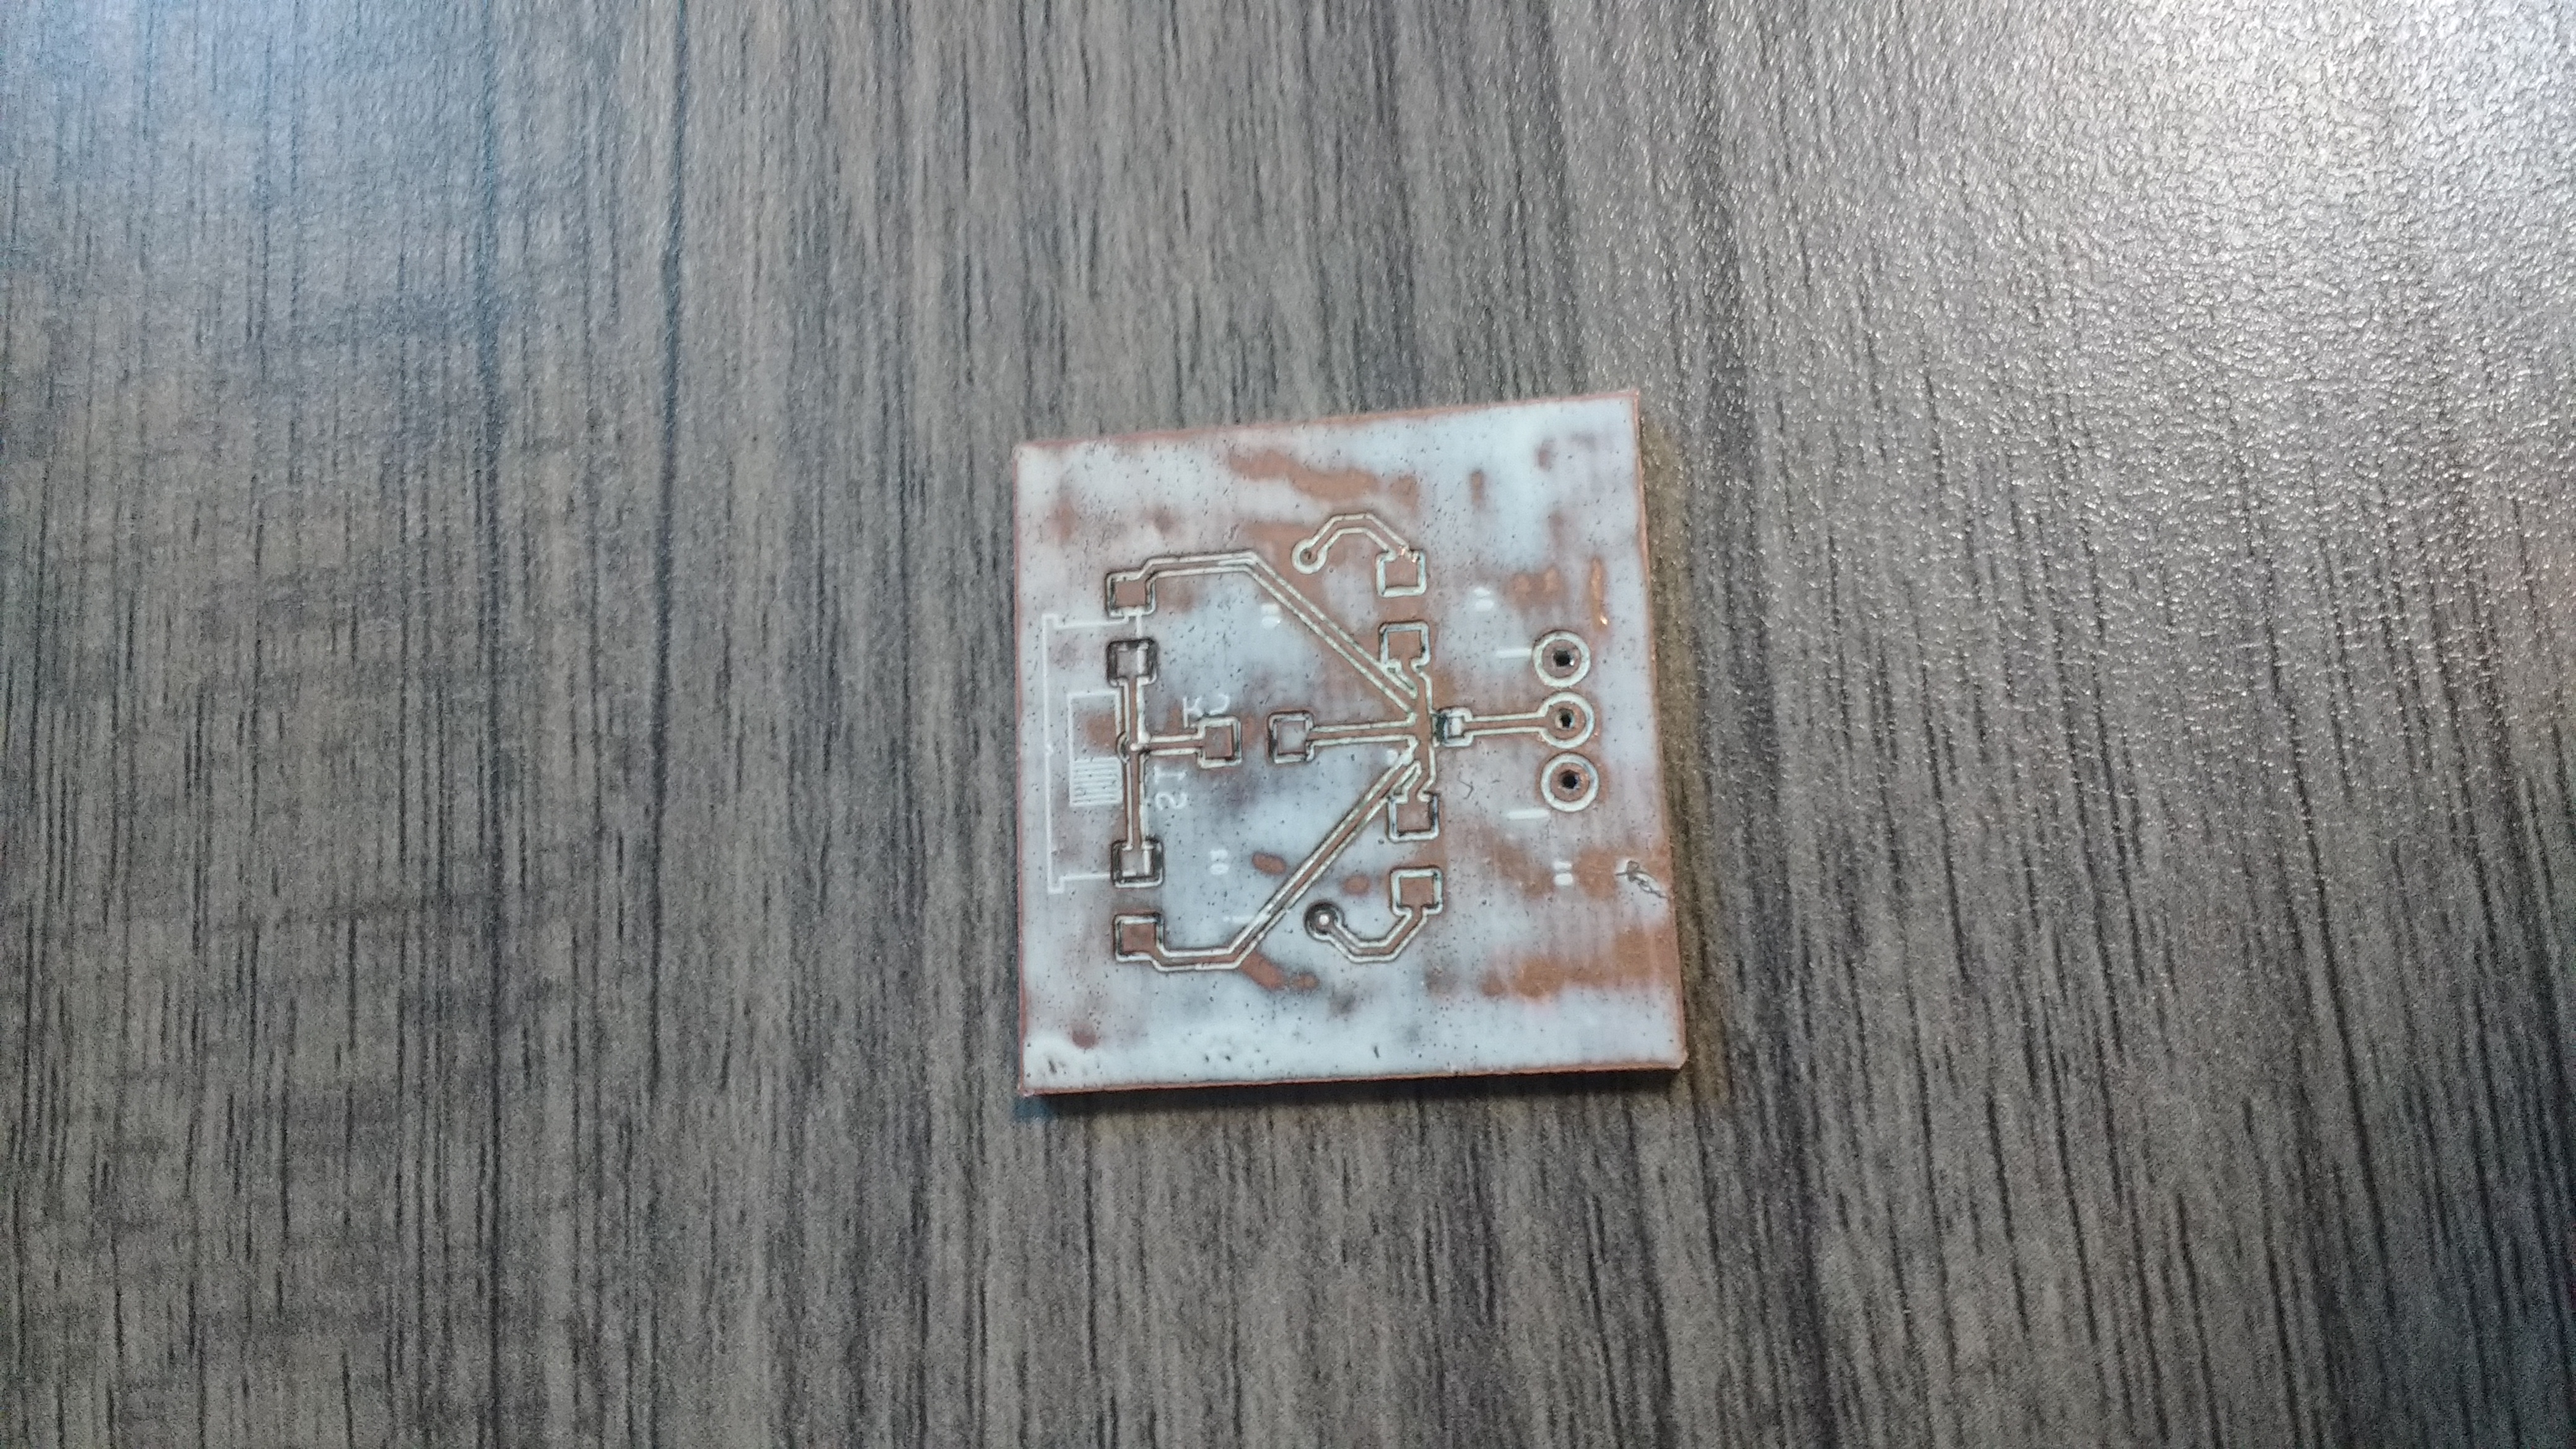 the top of a 1 inch by 1 inch copper PCB, with white paint covering its surface.  It has pads for resistors and leds